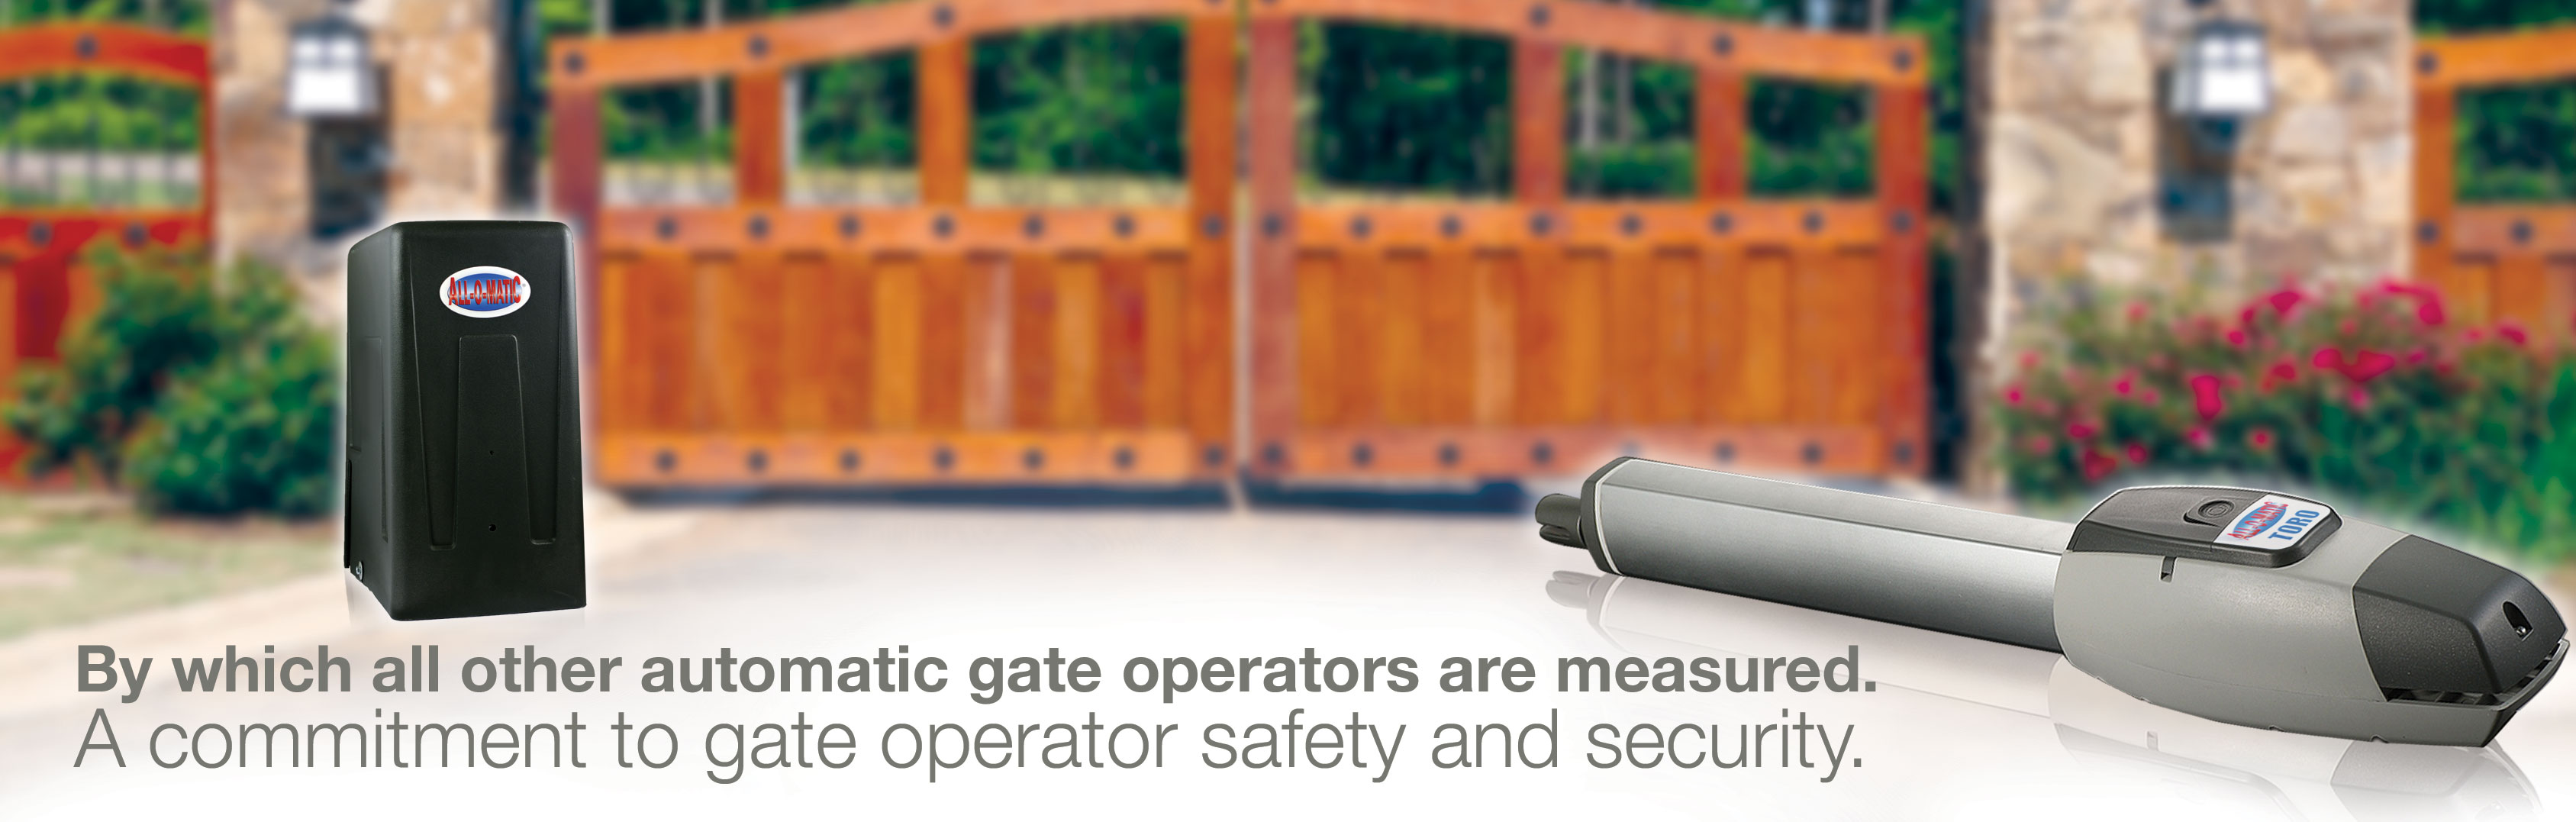 All-O-Matic - The Leader in Gate Operators Video